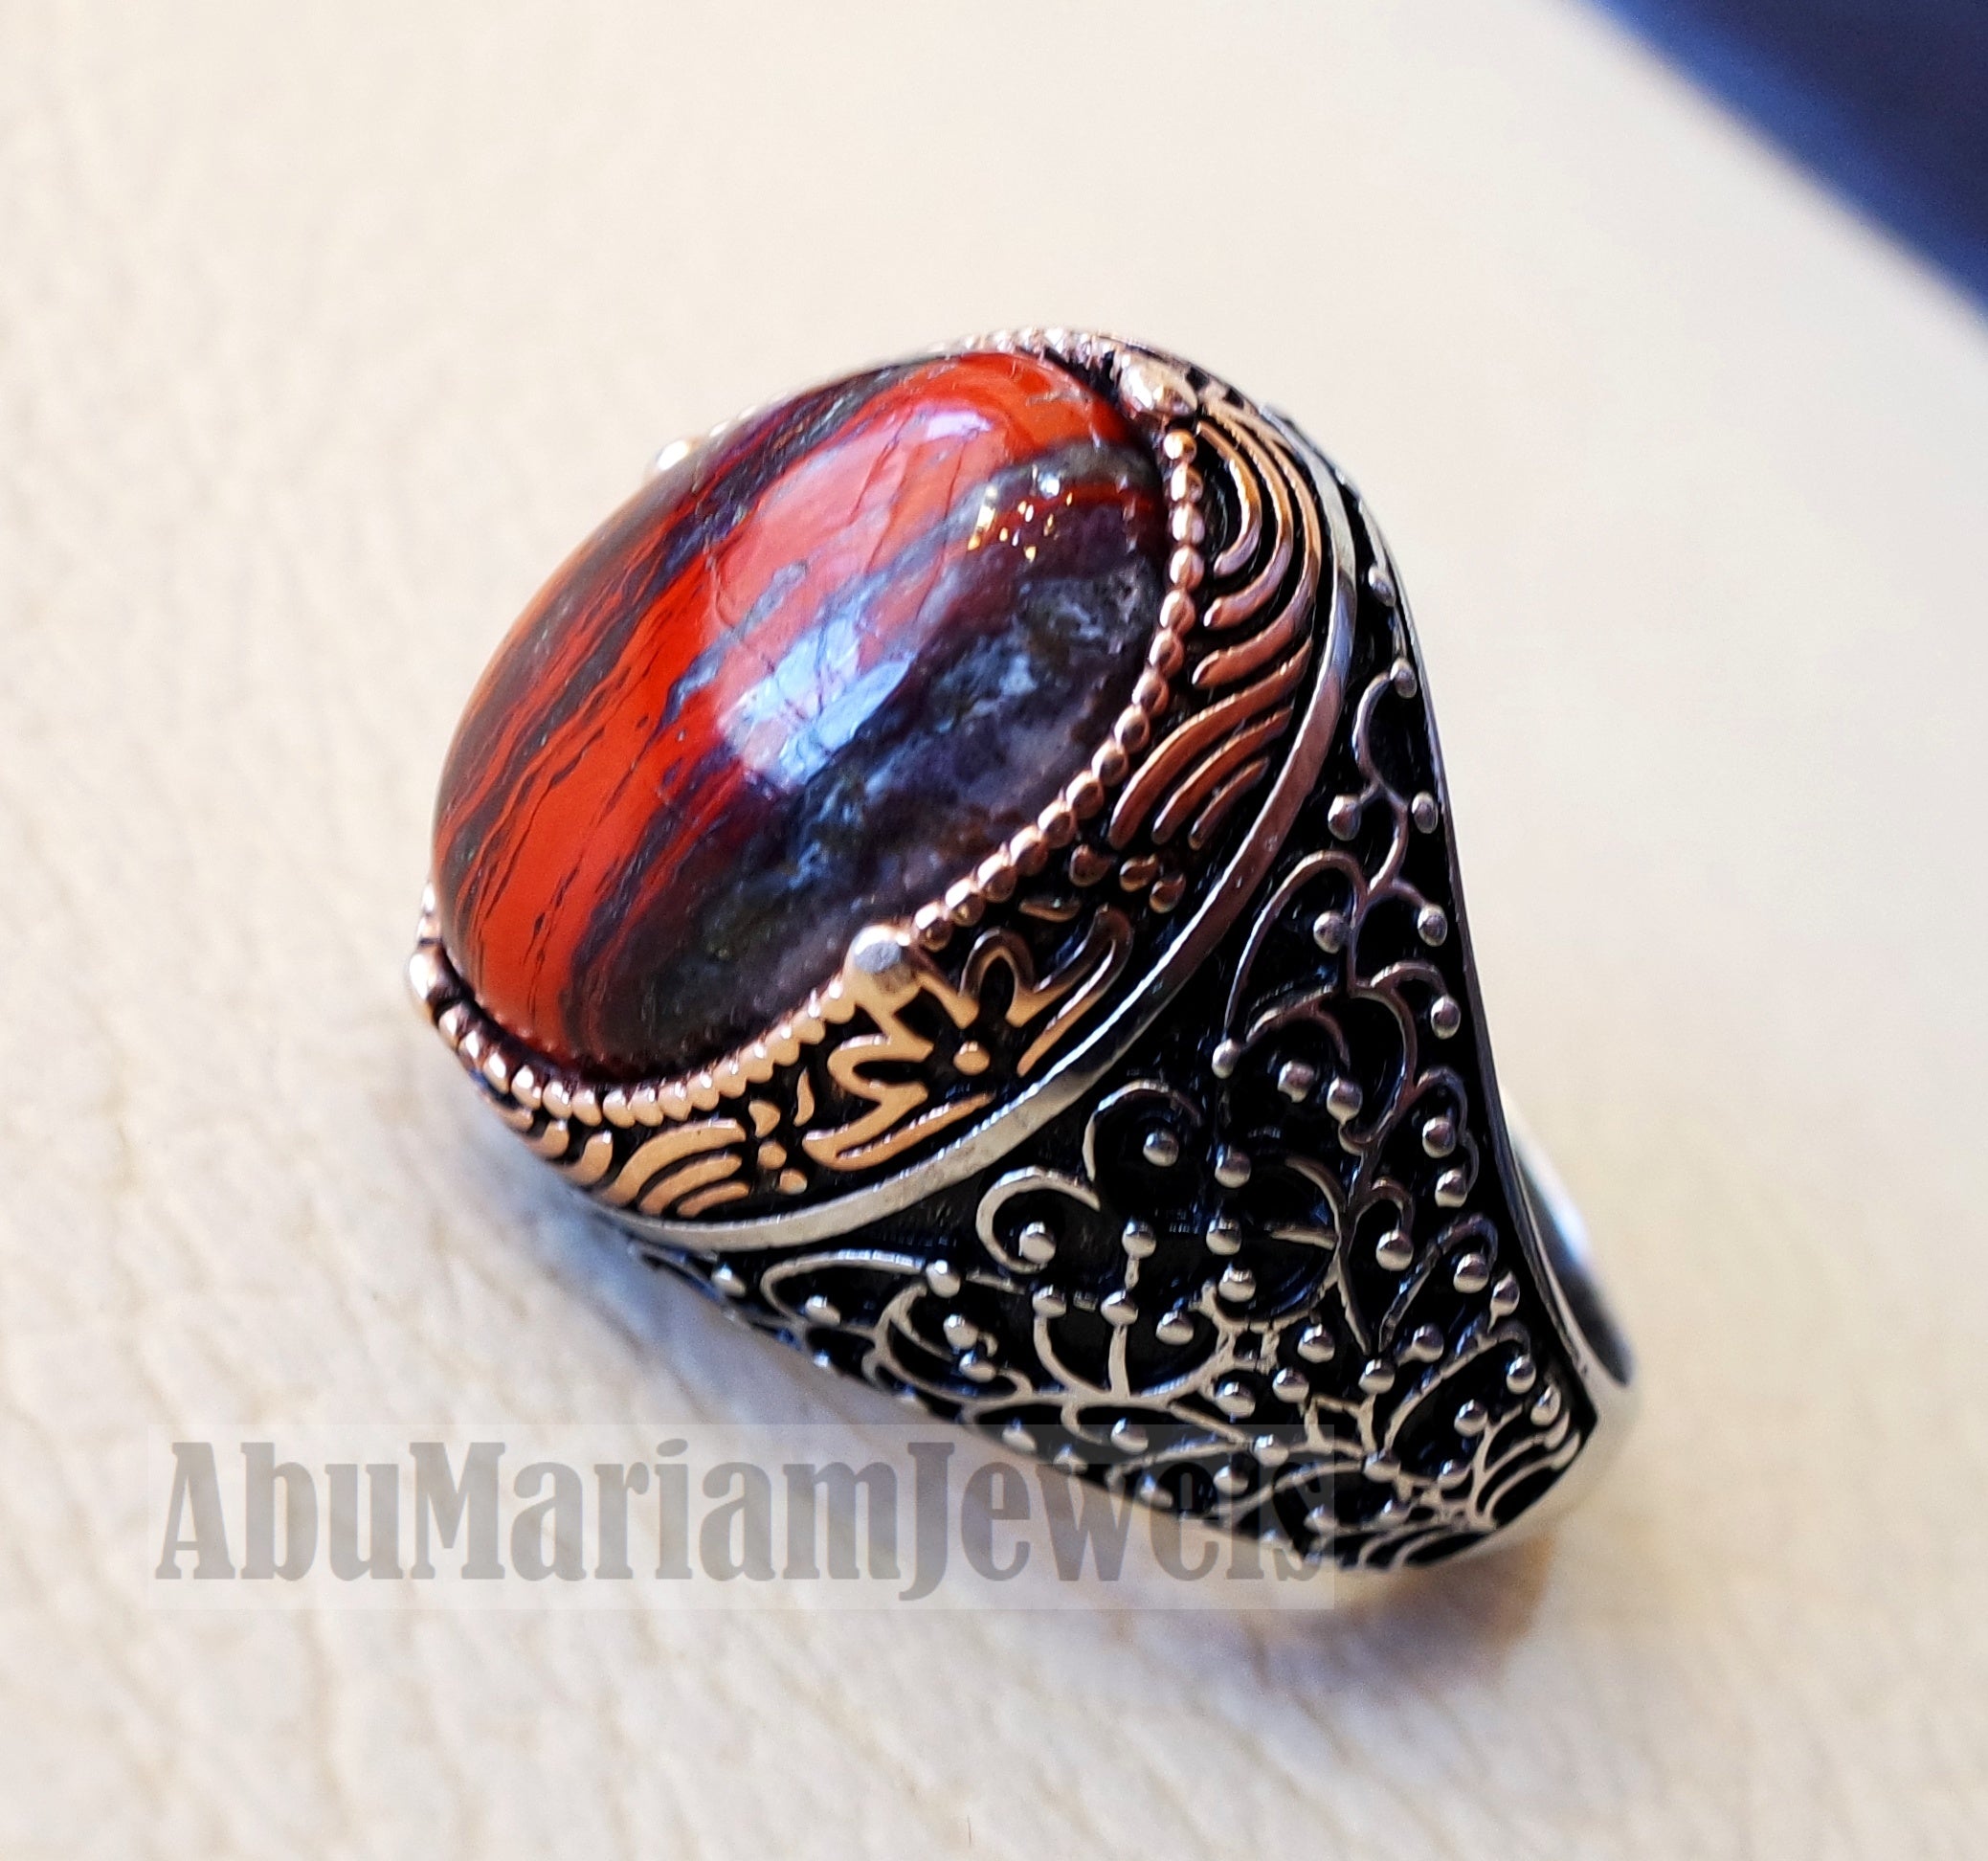 snake skin jasper man ring stone natural gem sterling silver 925 ring red and black oval semi precious cabochon jewelry bronze color frame